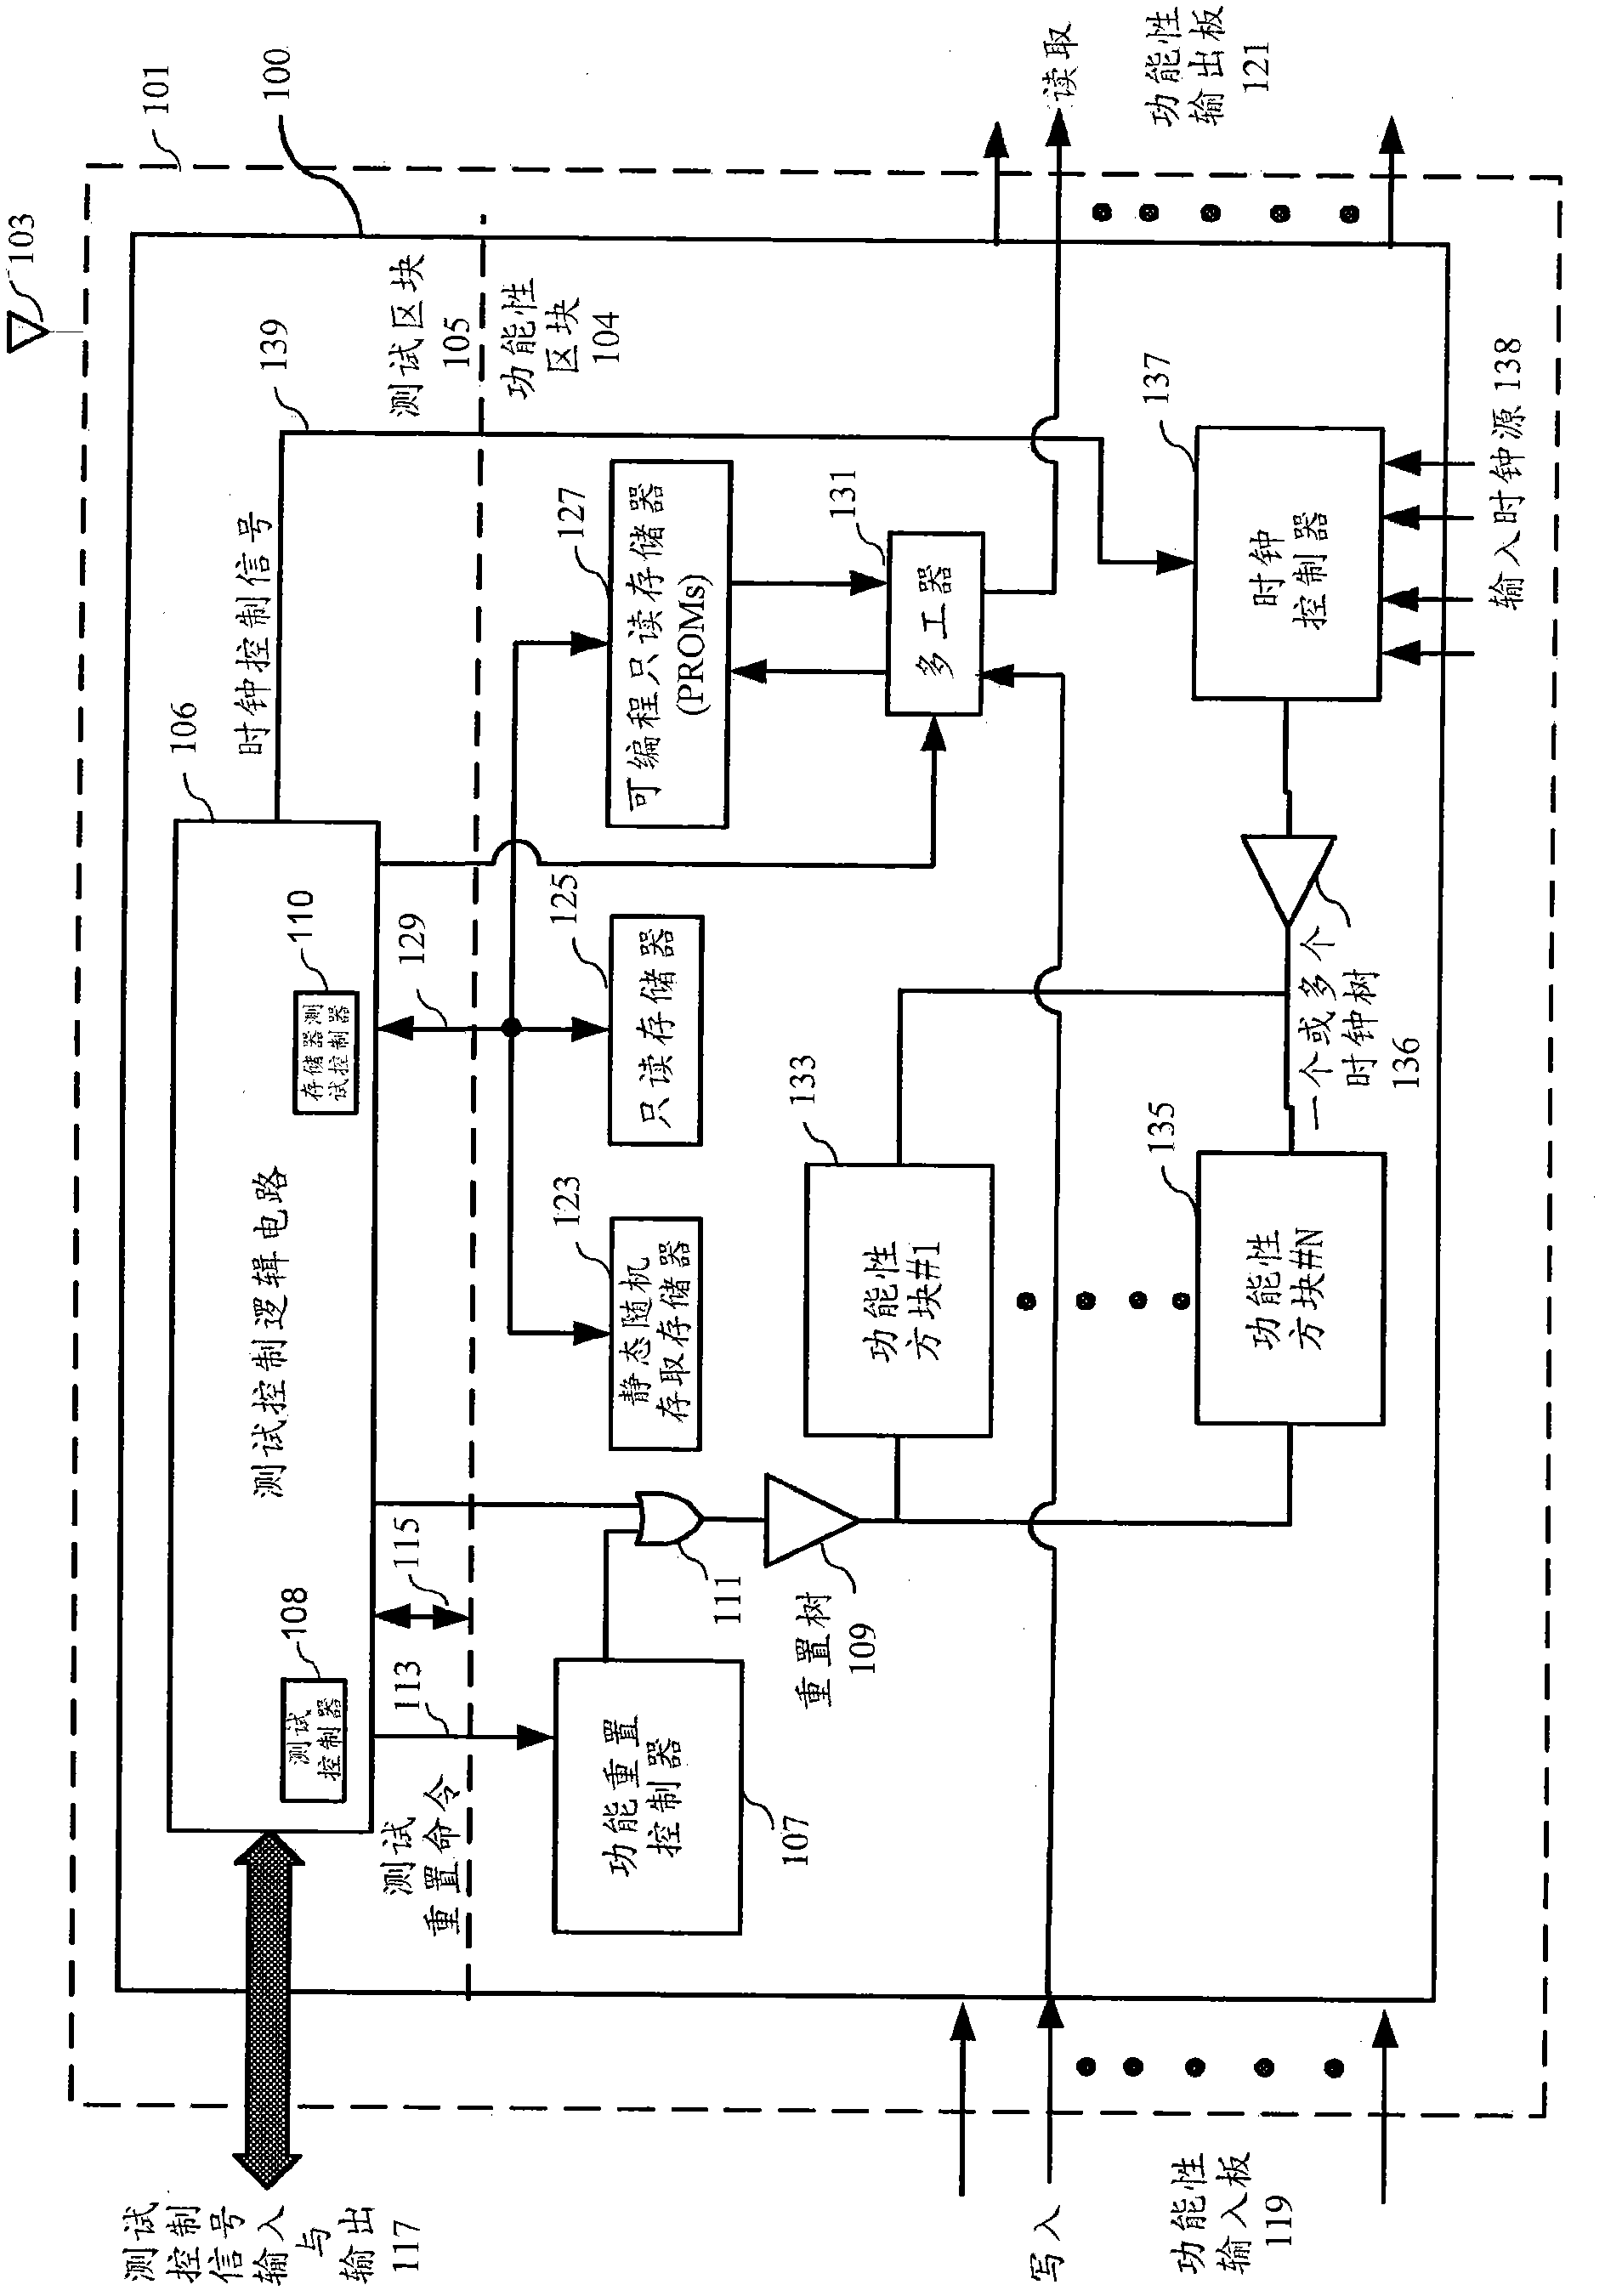 Method and apparatus for securing digital information on an integrated circuit during test operating modes